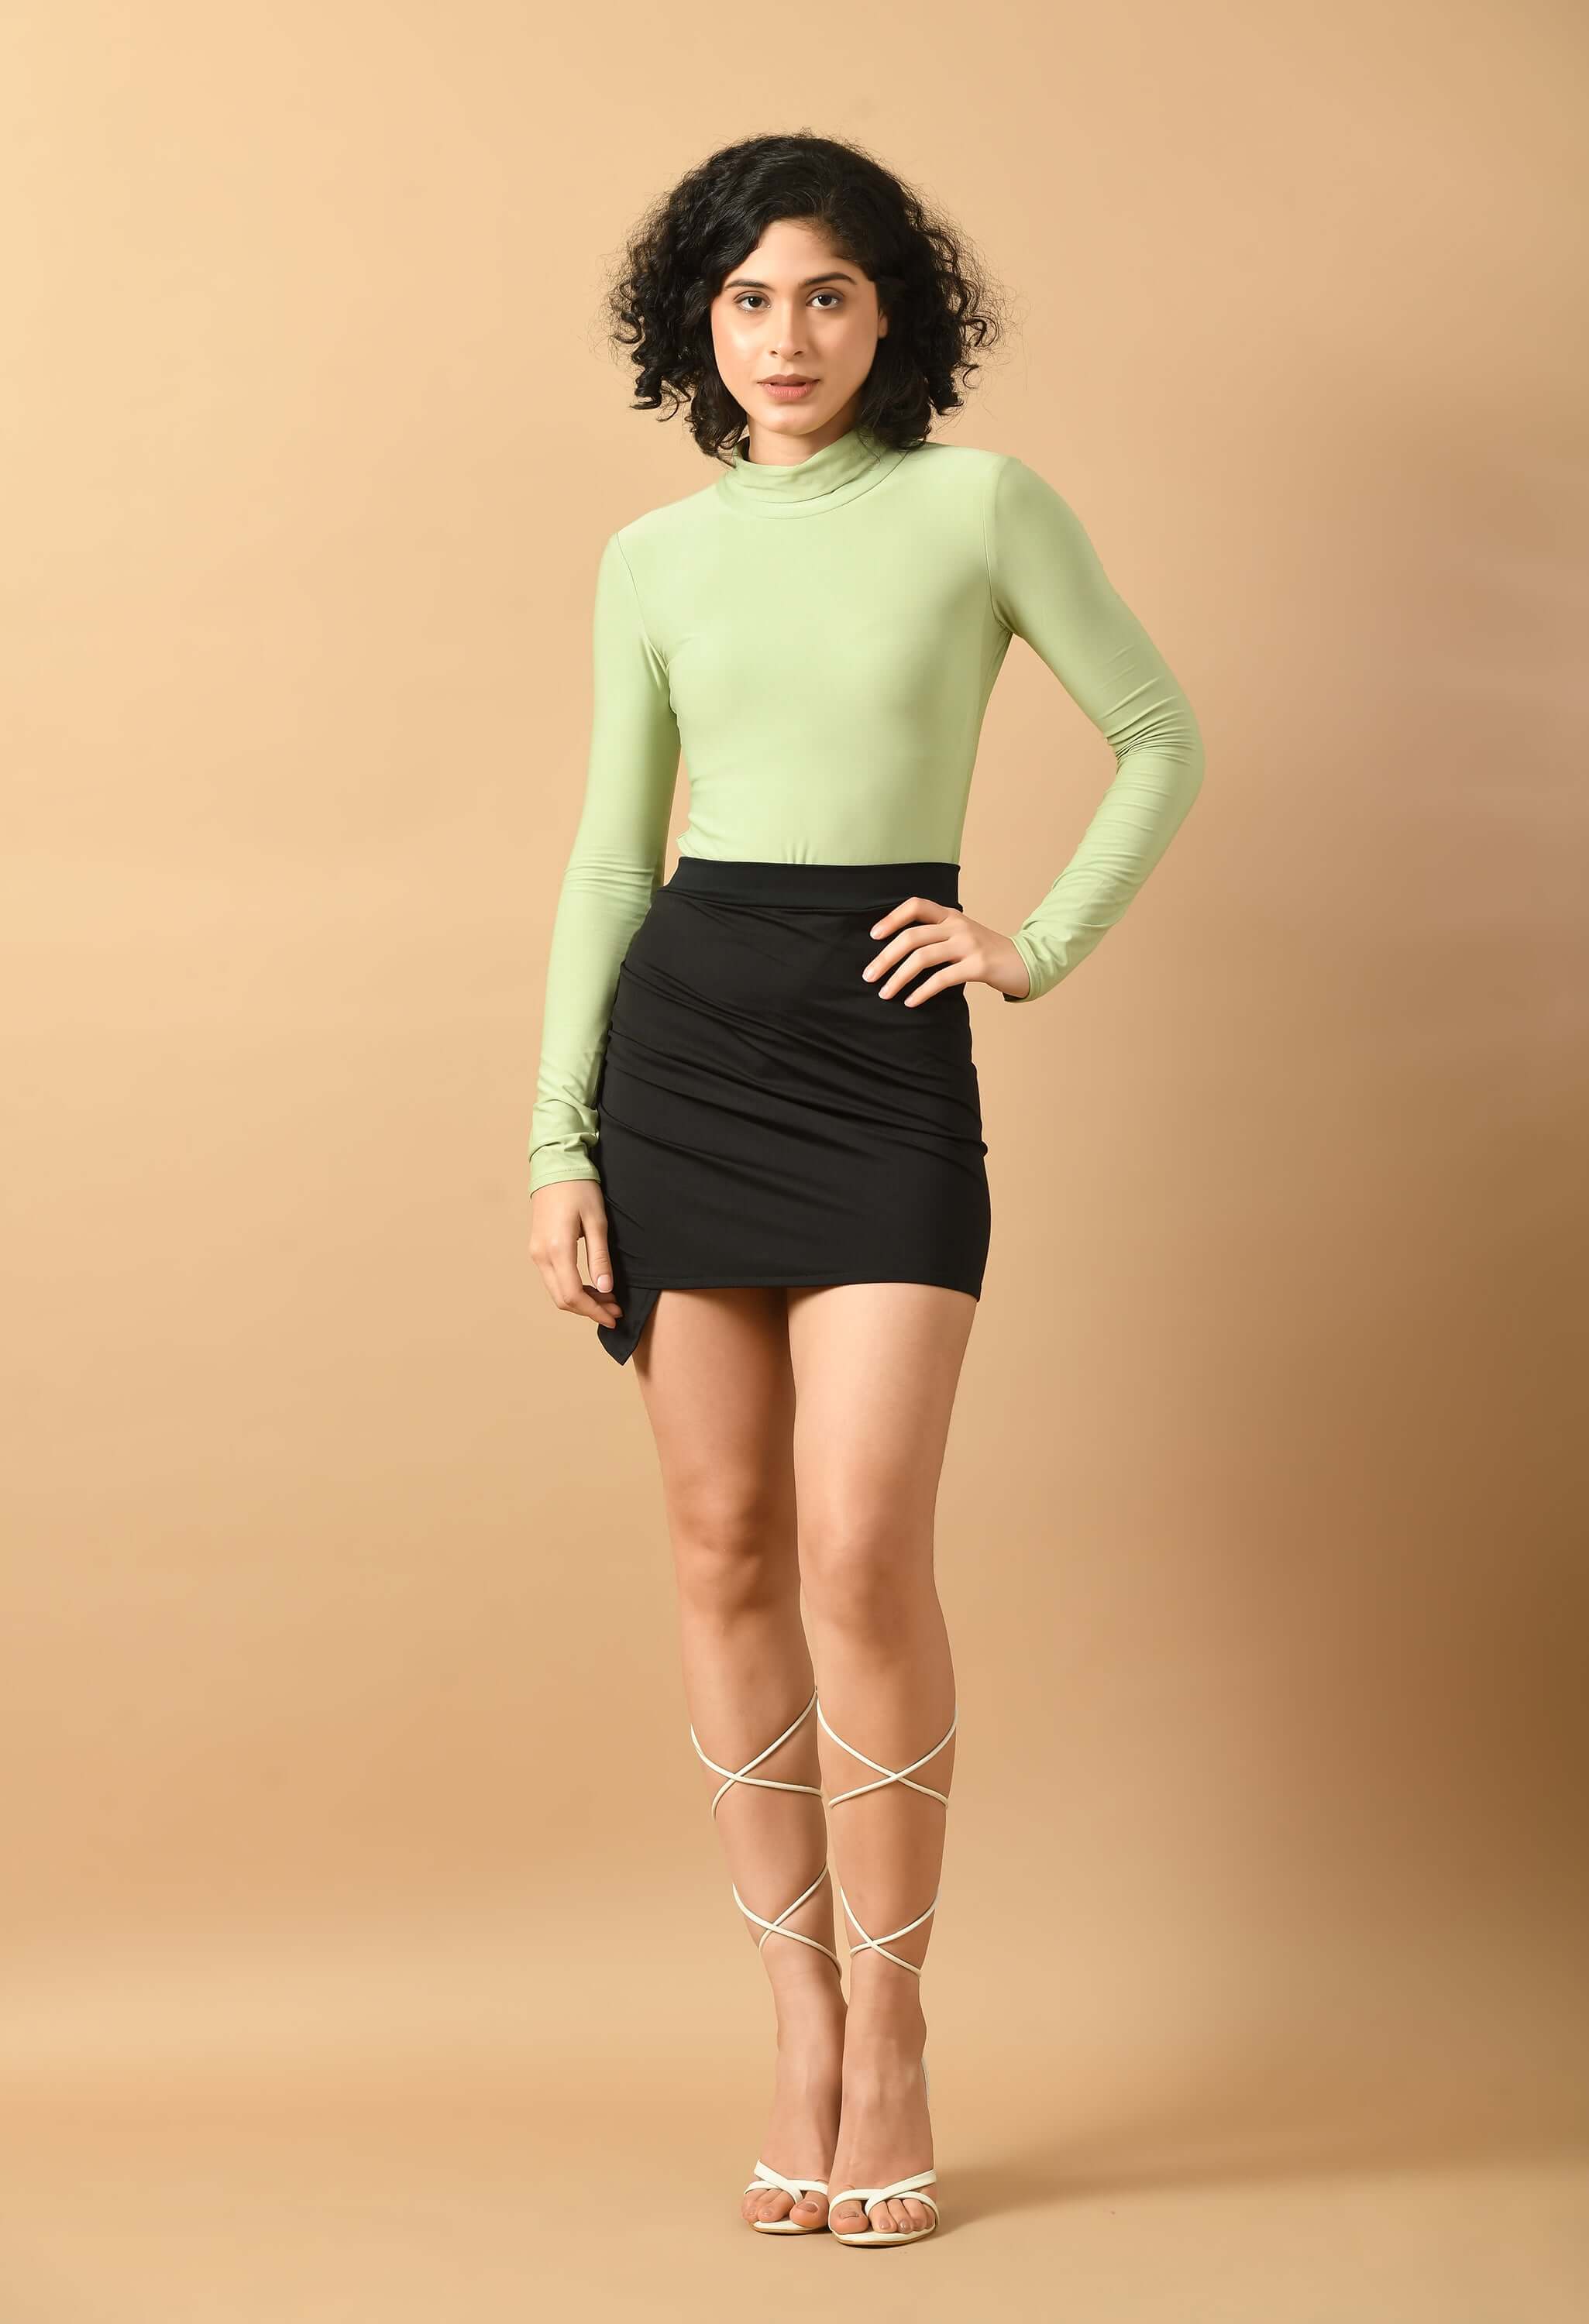 Sassy High-Waisted Slit Skirt by offmint